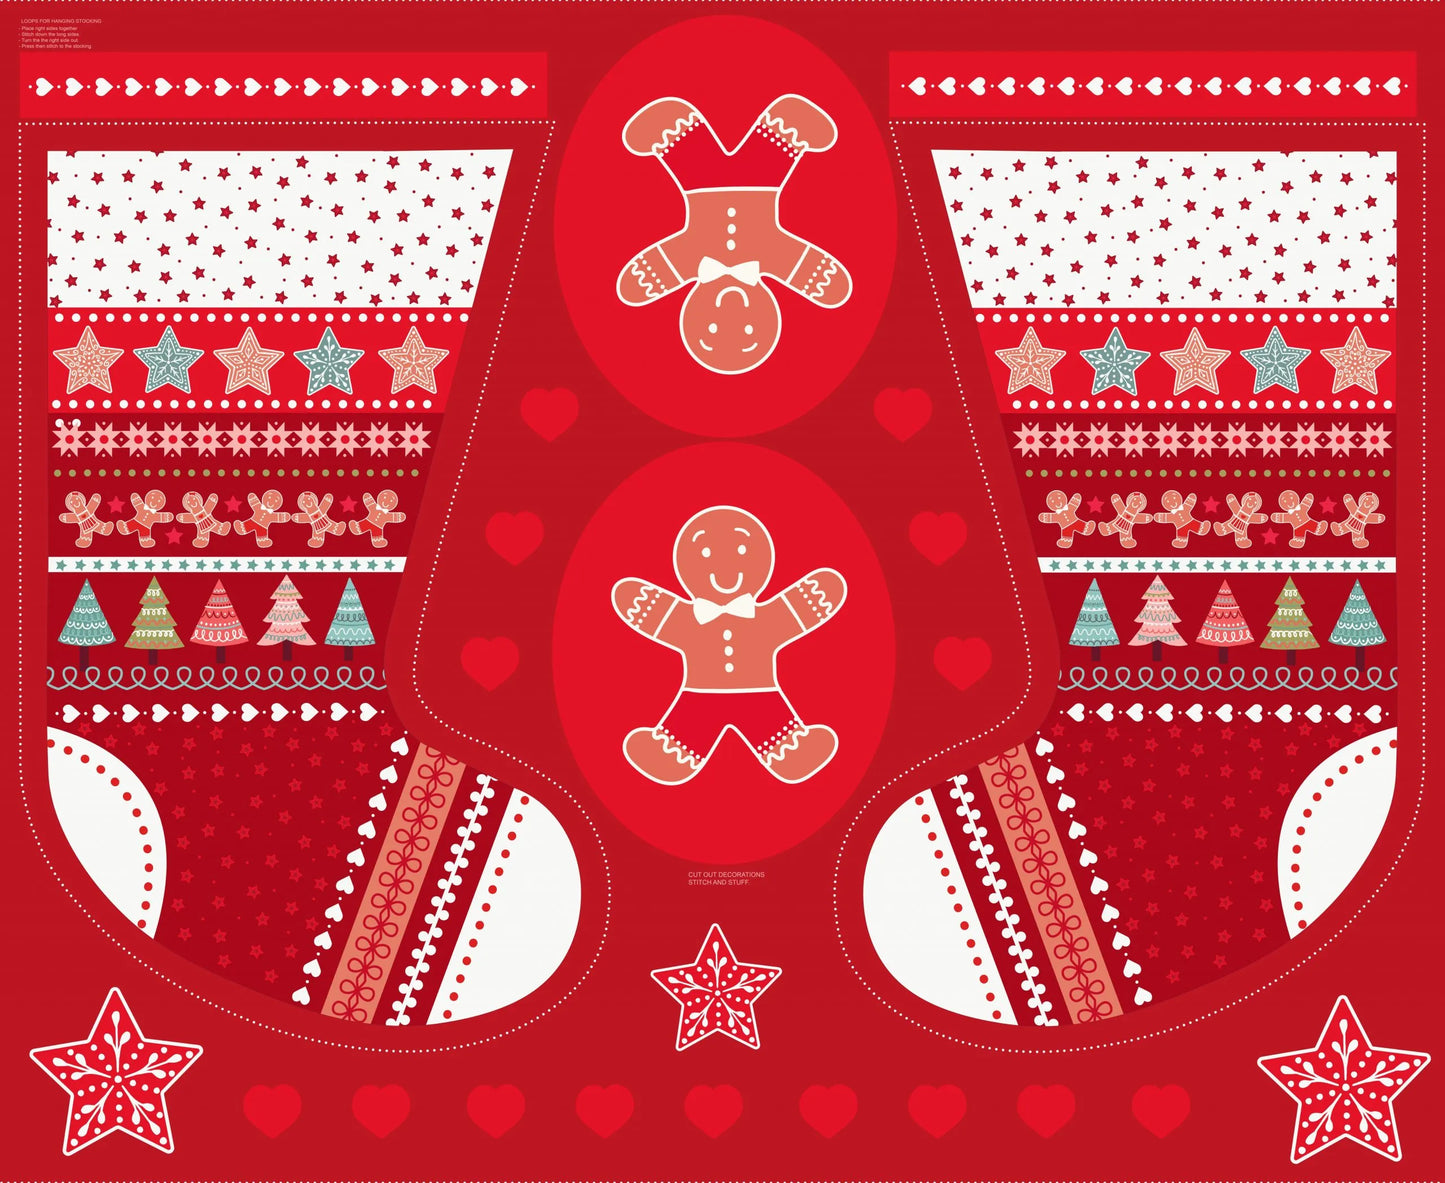 Gingerbread Stocking & Cut Outs Quilting Fabric Panel